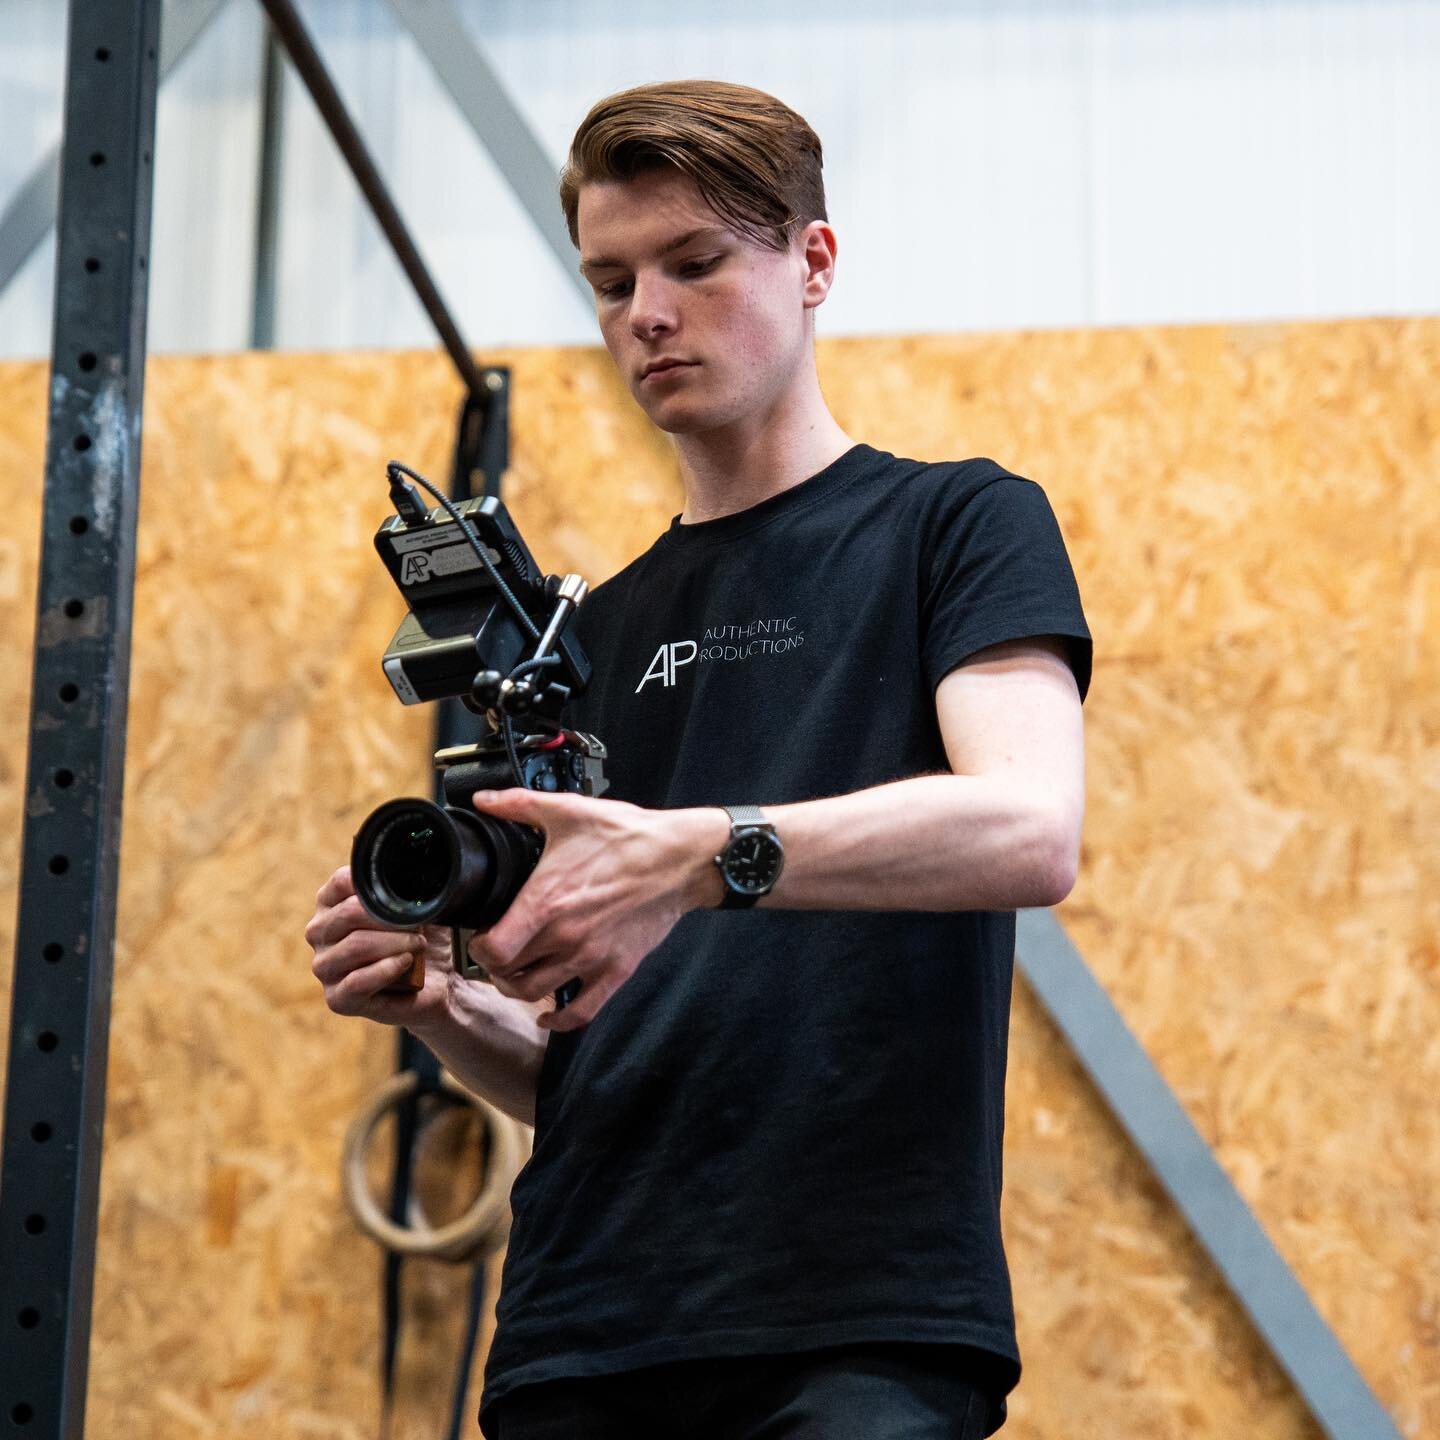 What a surreal couple of weeks it has been! 🎞️

From back to back Crossfit comps to documentary filming days to long nights in the office editing - All made possible by our incredible clients. 

Your support fuels our passion and dedication.

We&rsq